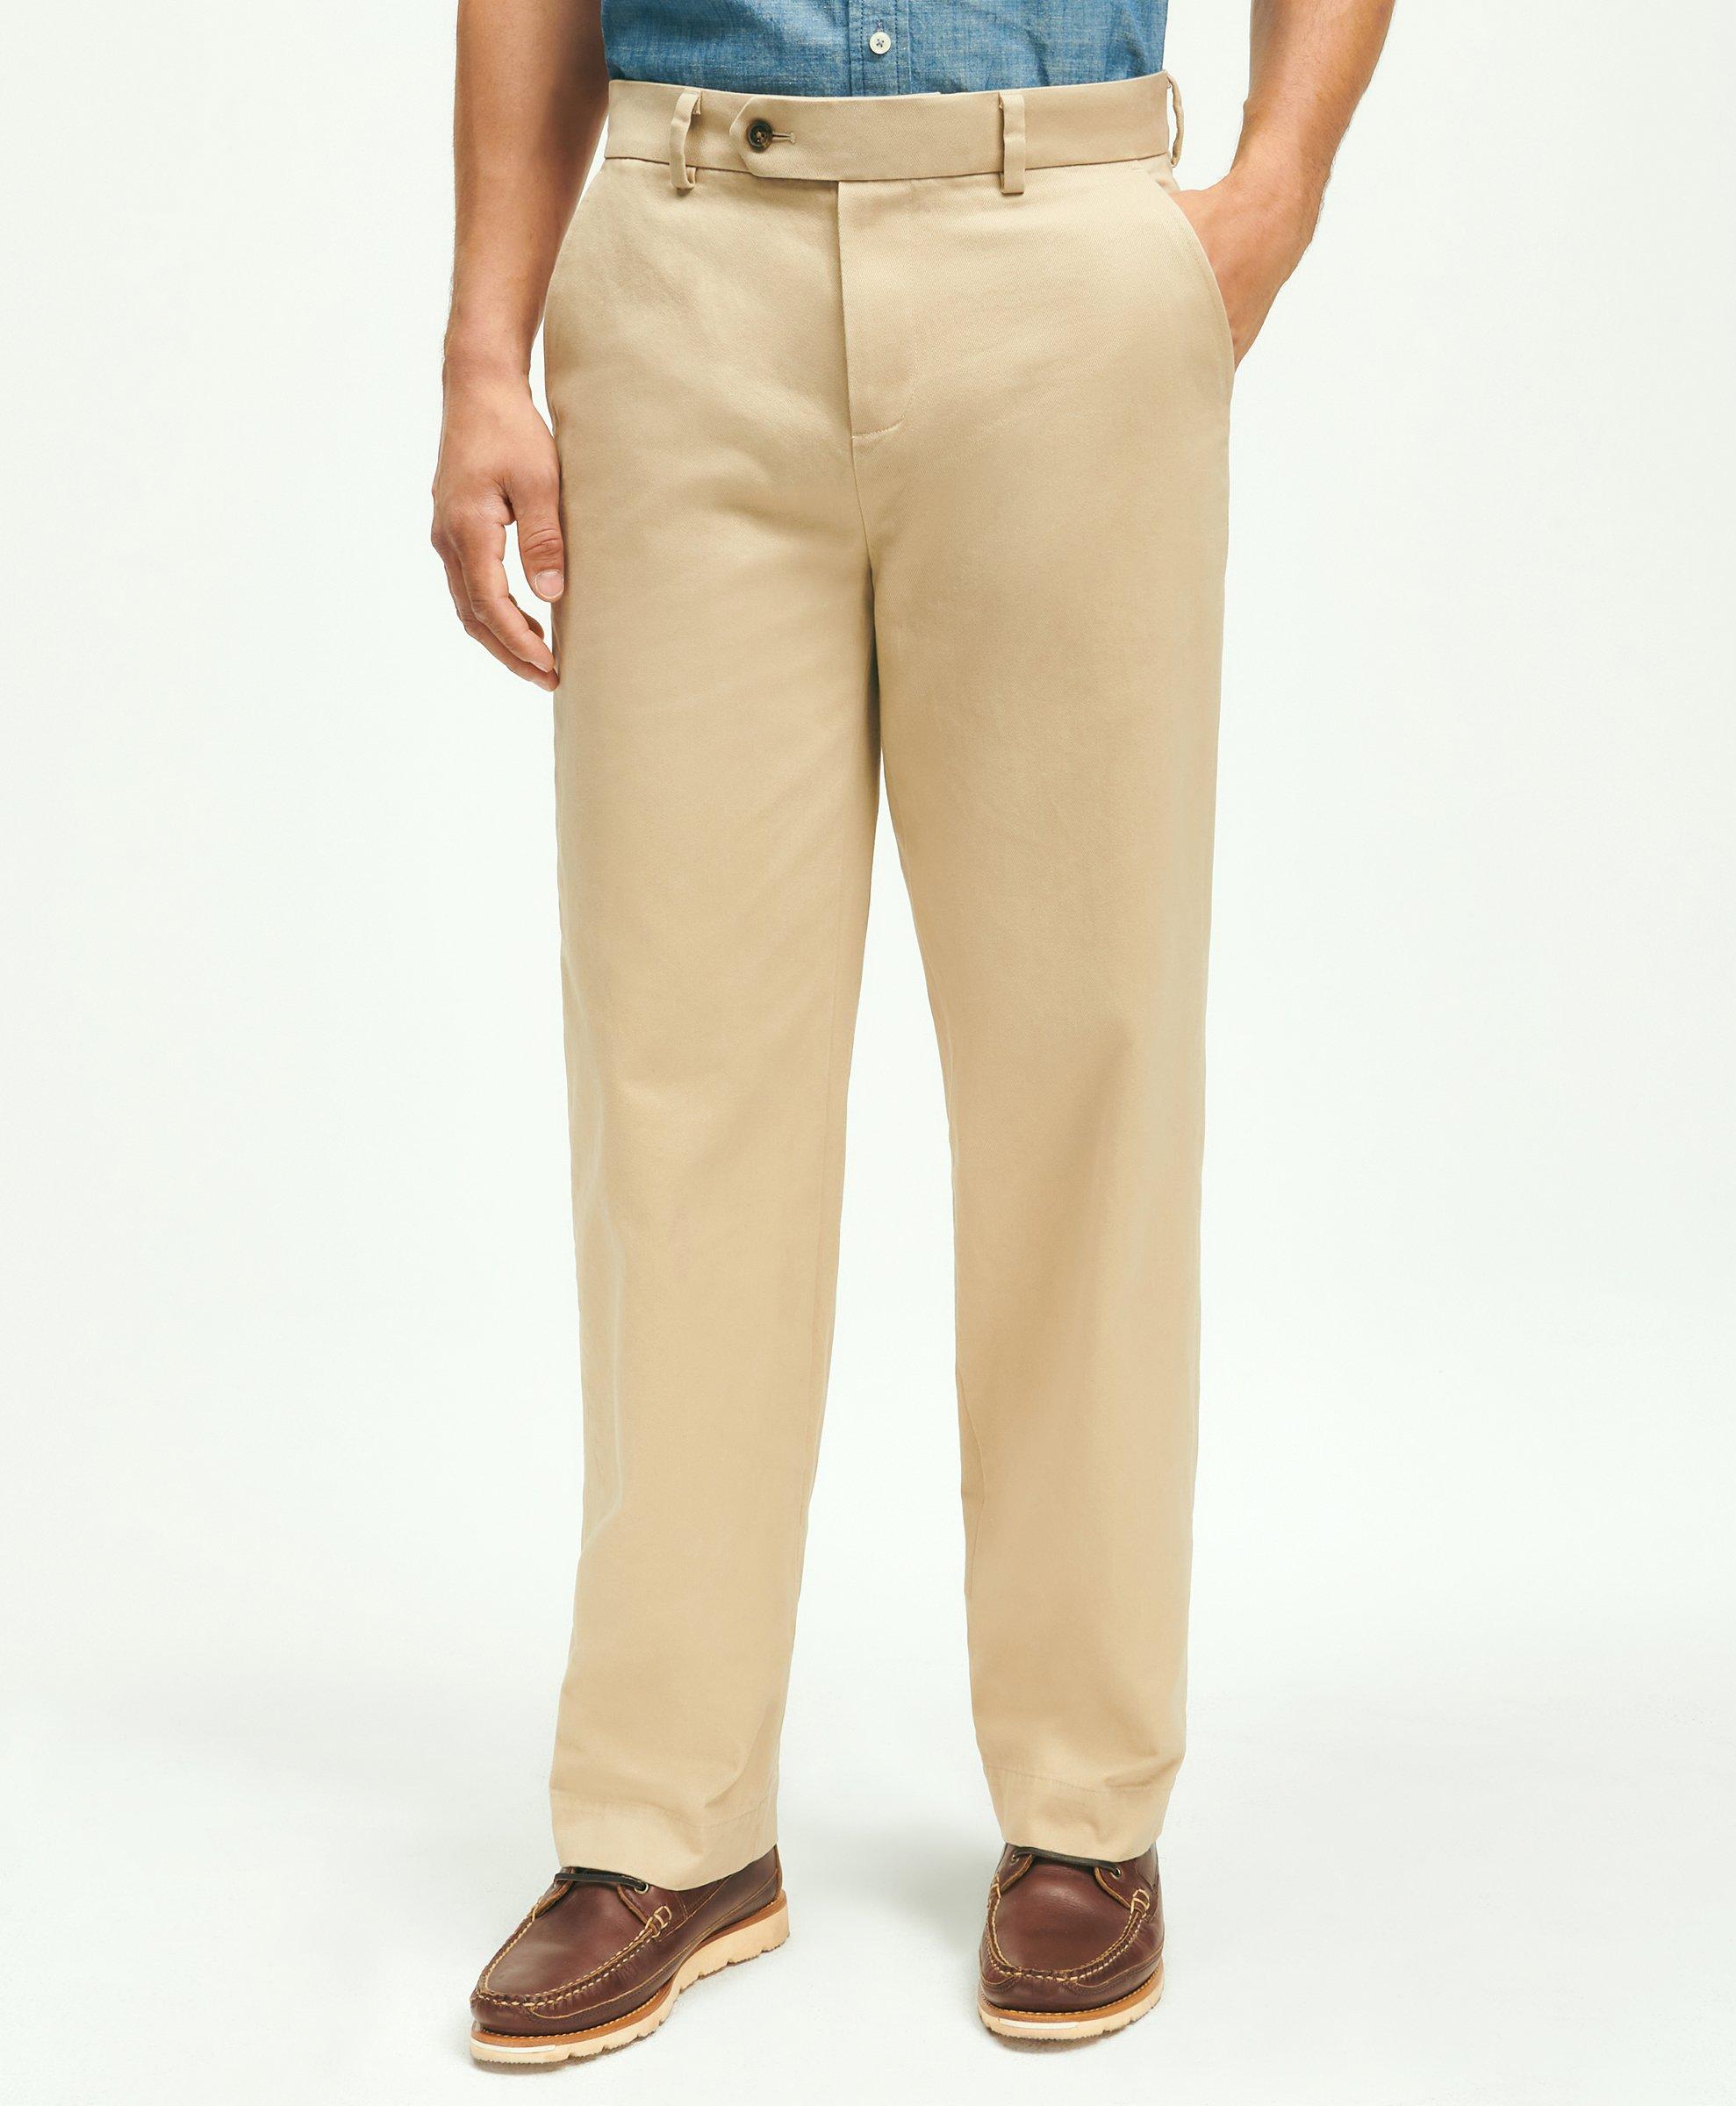 Brooks Brothers Cotton Vintage Chino Pants | Beige | Size 36 32